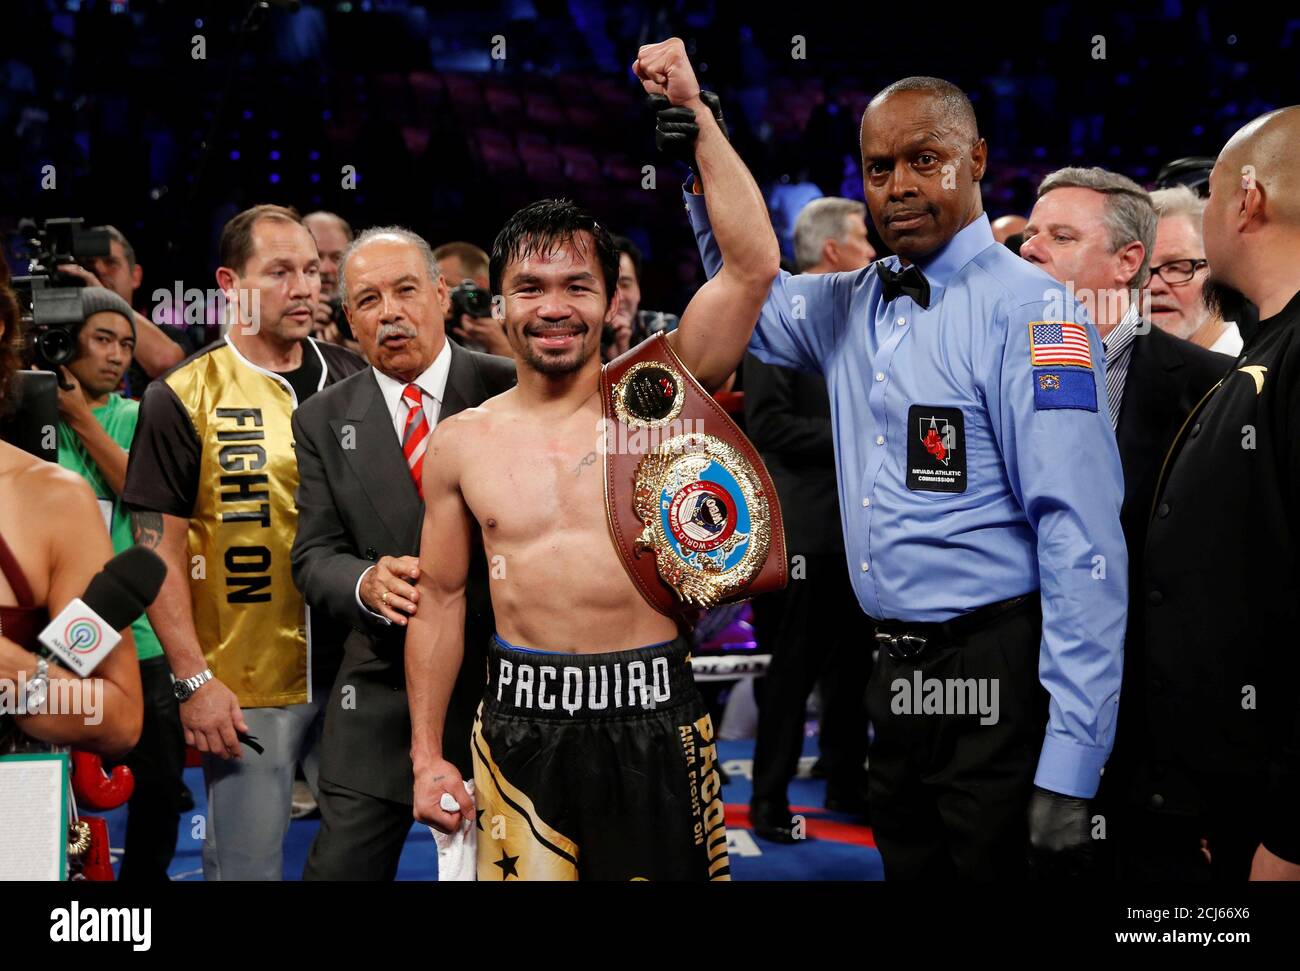 Bukser Rodet etik Manny Pacquiao celebrates his victory over WBO welterweight champion Jessie  Vargas following their title fight at the Thomas & Mack Center in Las  Vegas, Nevada, U.S., November 5, 2016. Referee Kenny Bayless